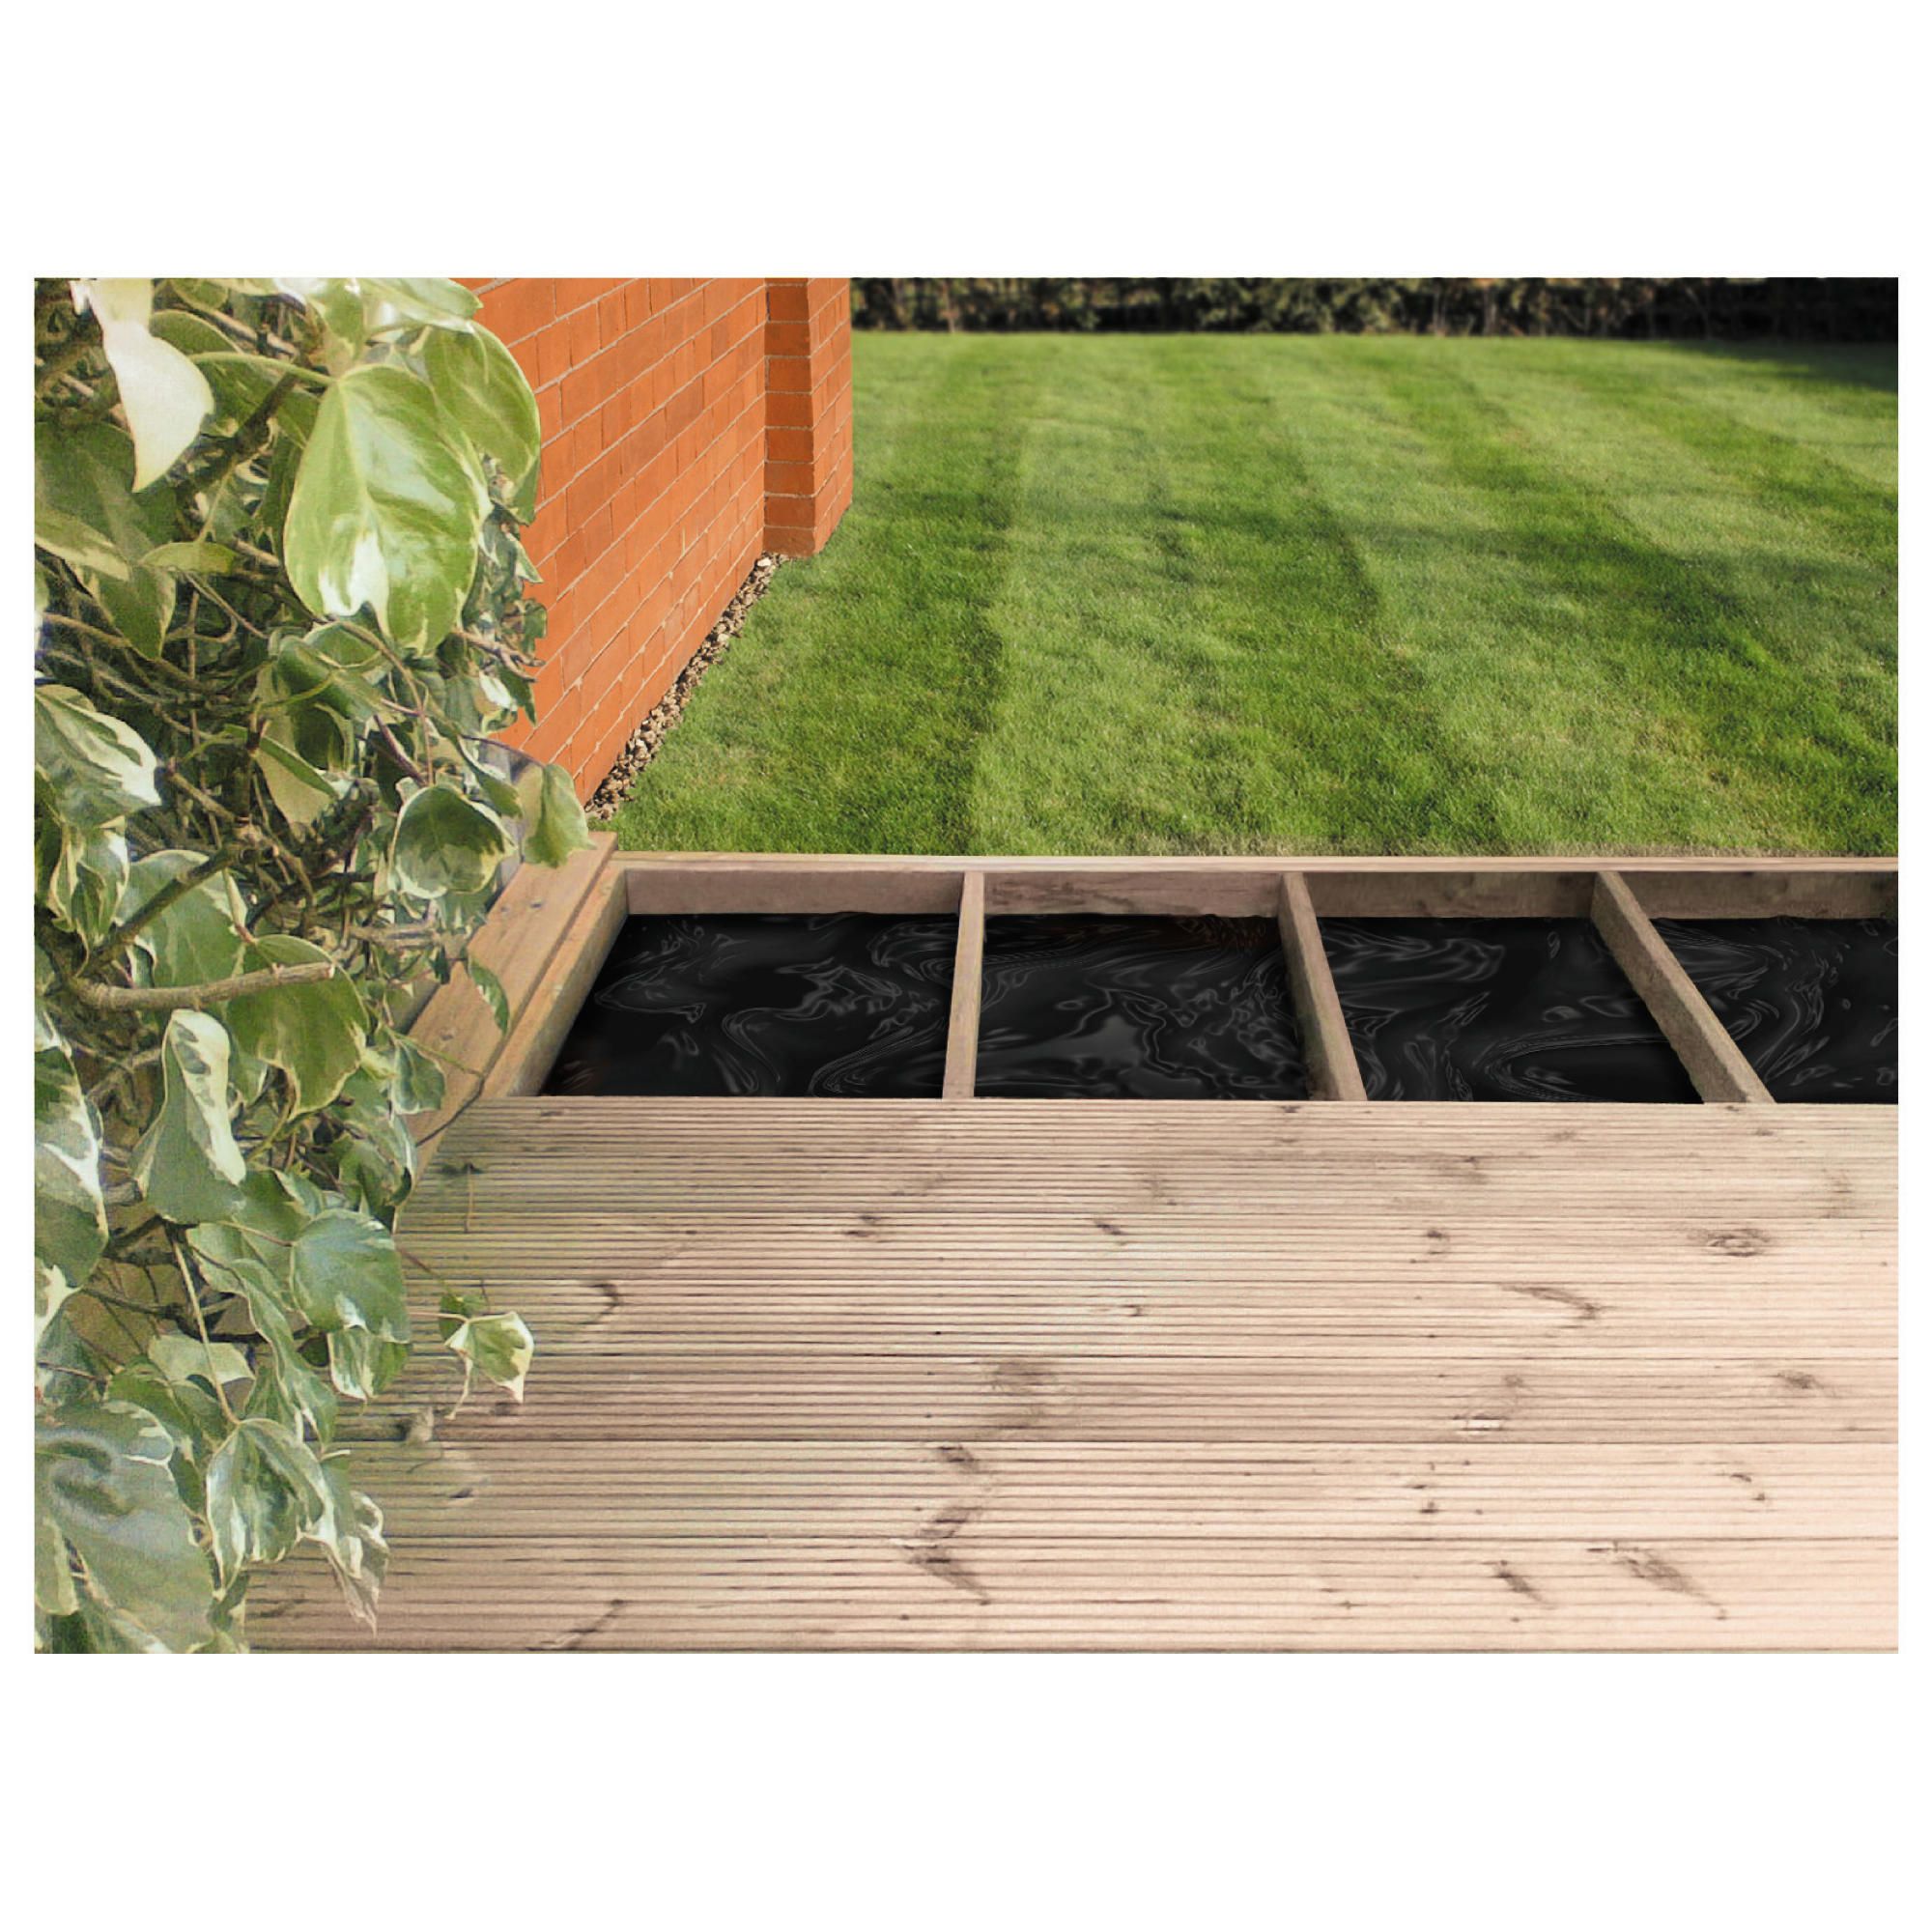 Finnlife Deck and Joist Pack (3.6mx3.6m) at Tesco Direct